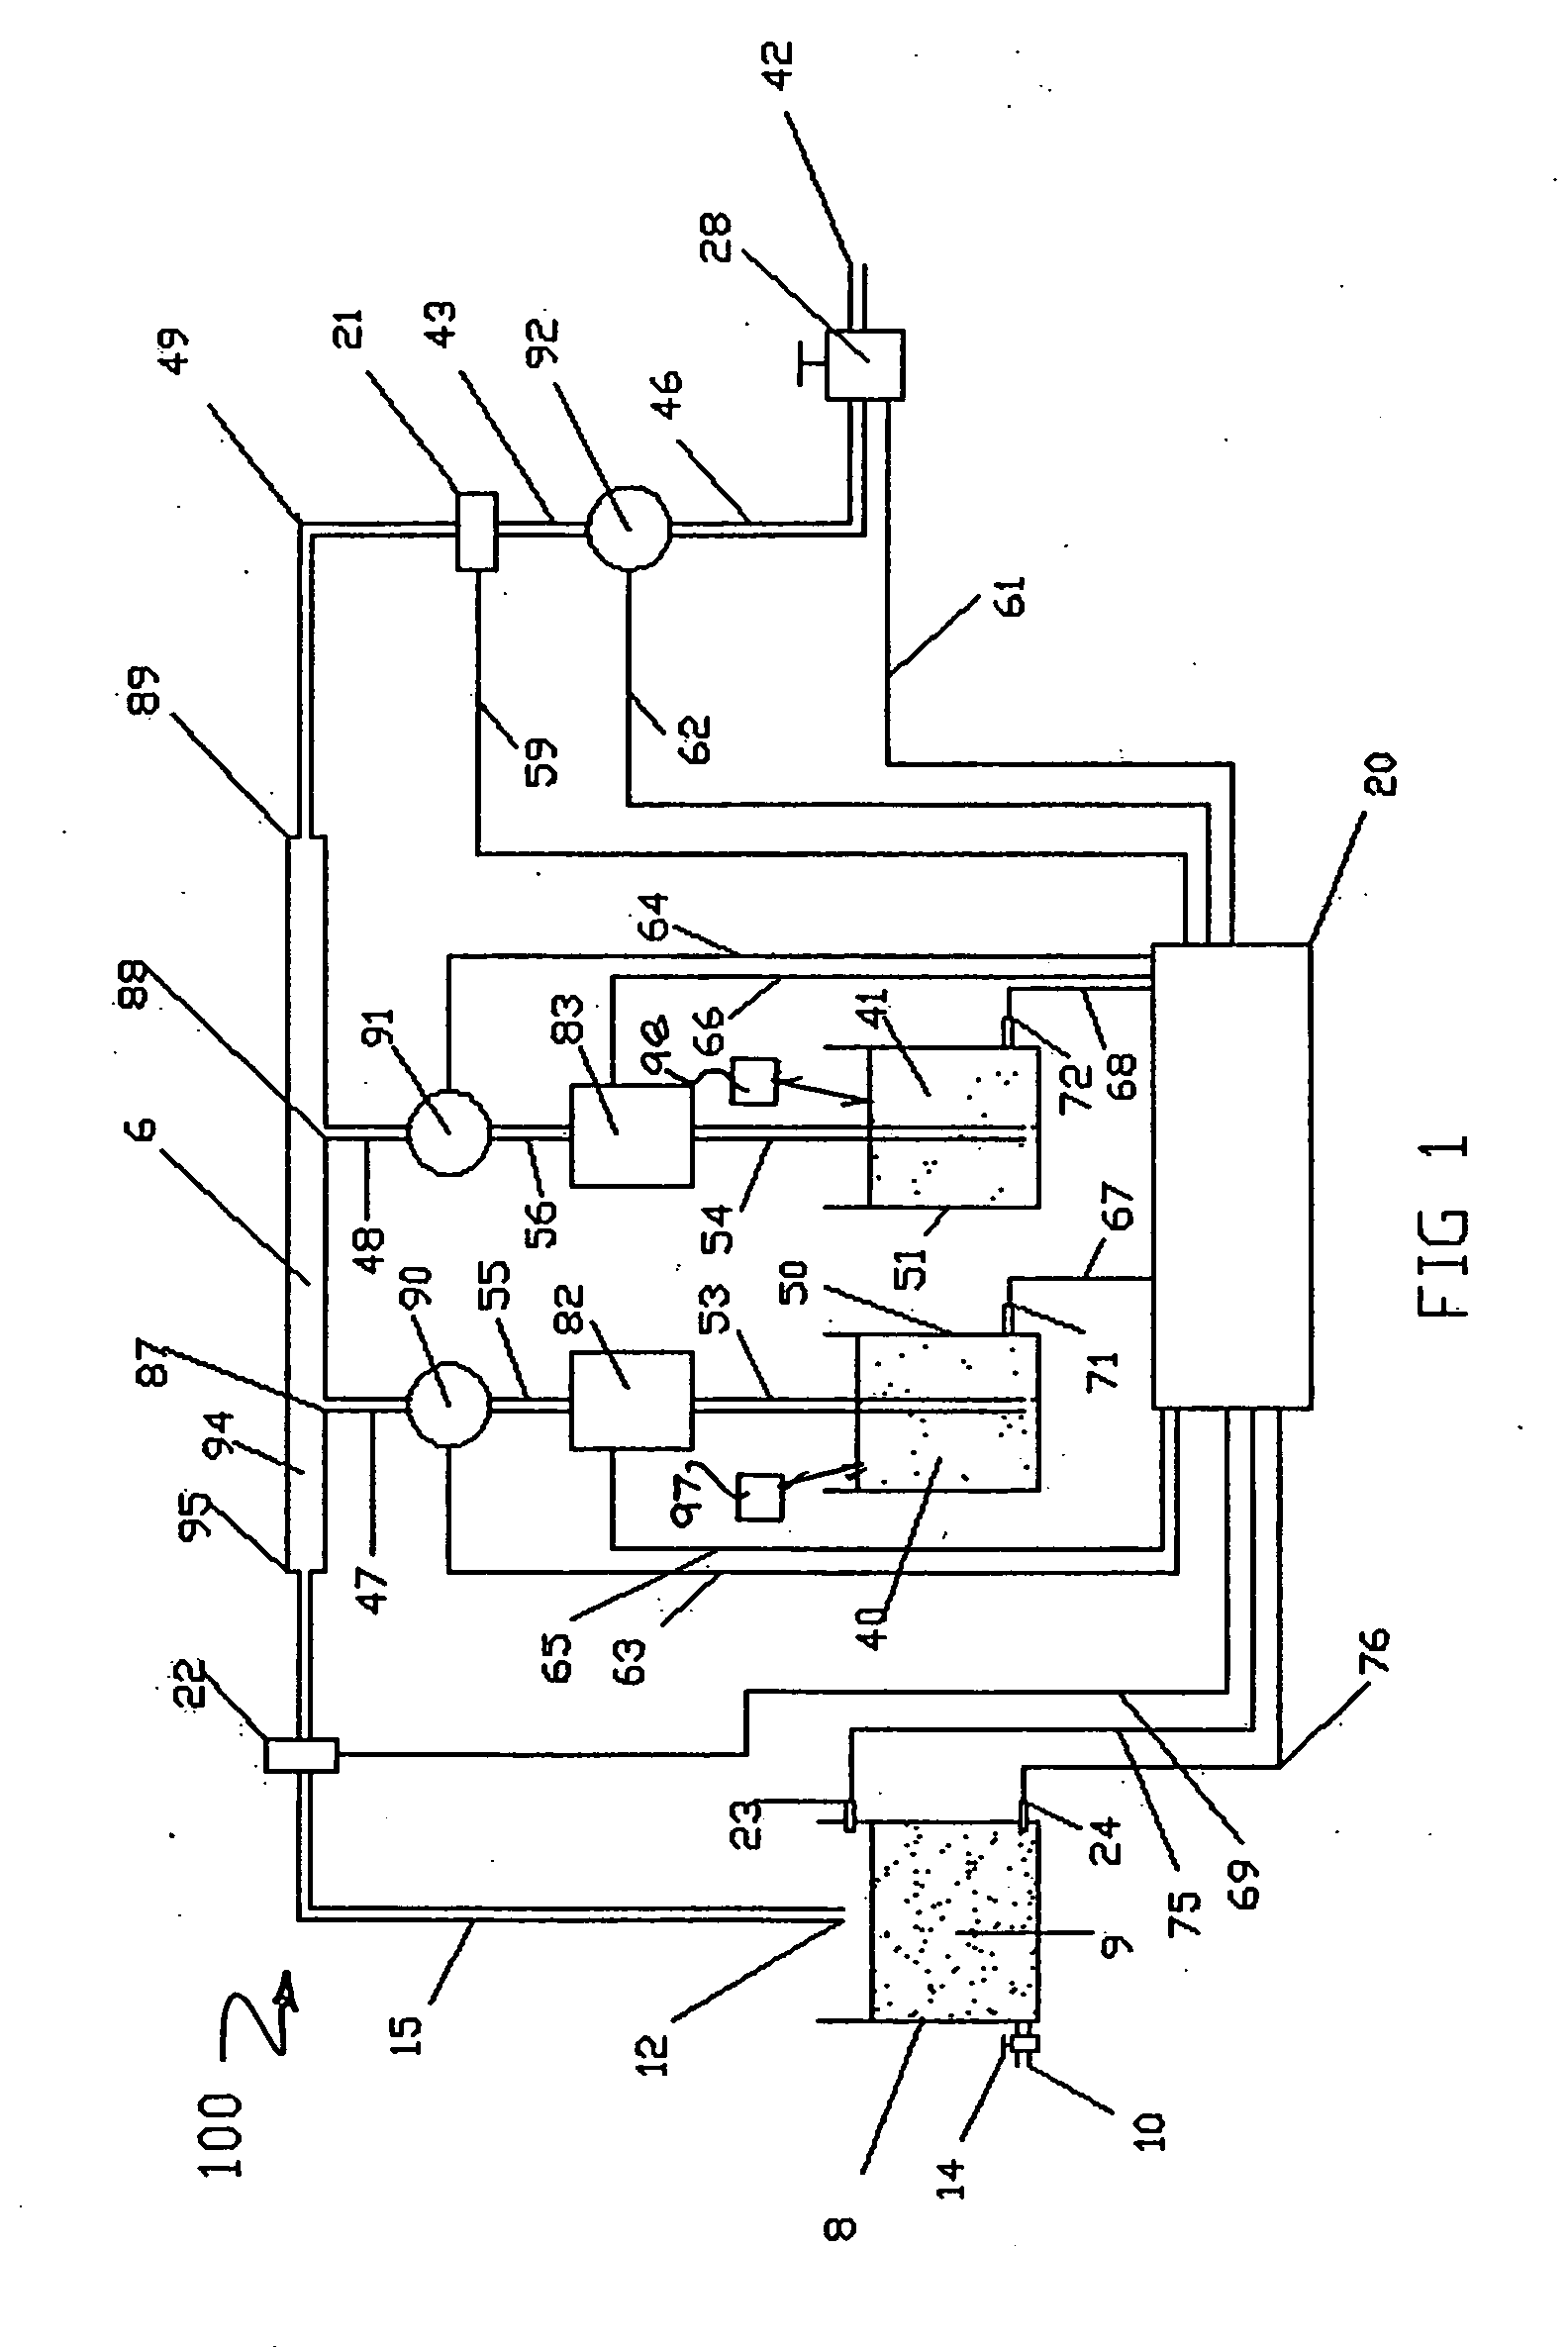 Methods and apparatus for mixing dairy animal treatment chemicals